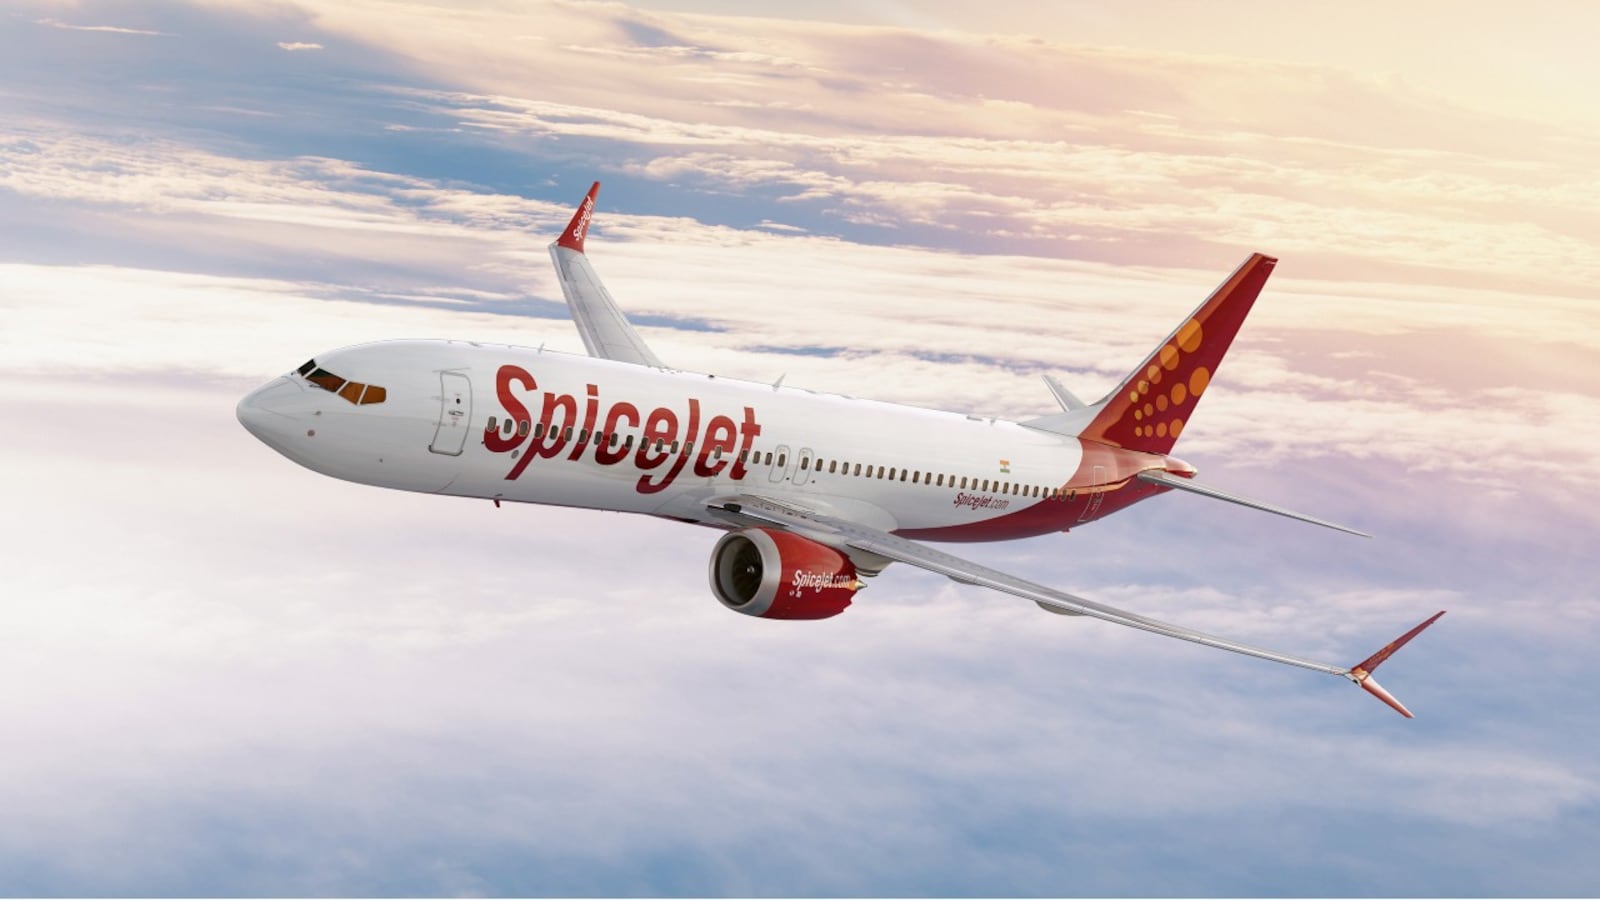 NCLT issues notice to SpiceJet on insolvency plea